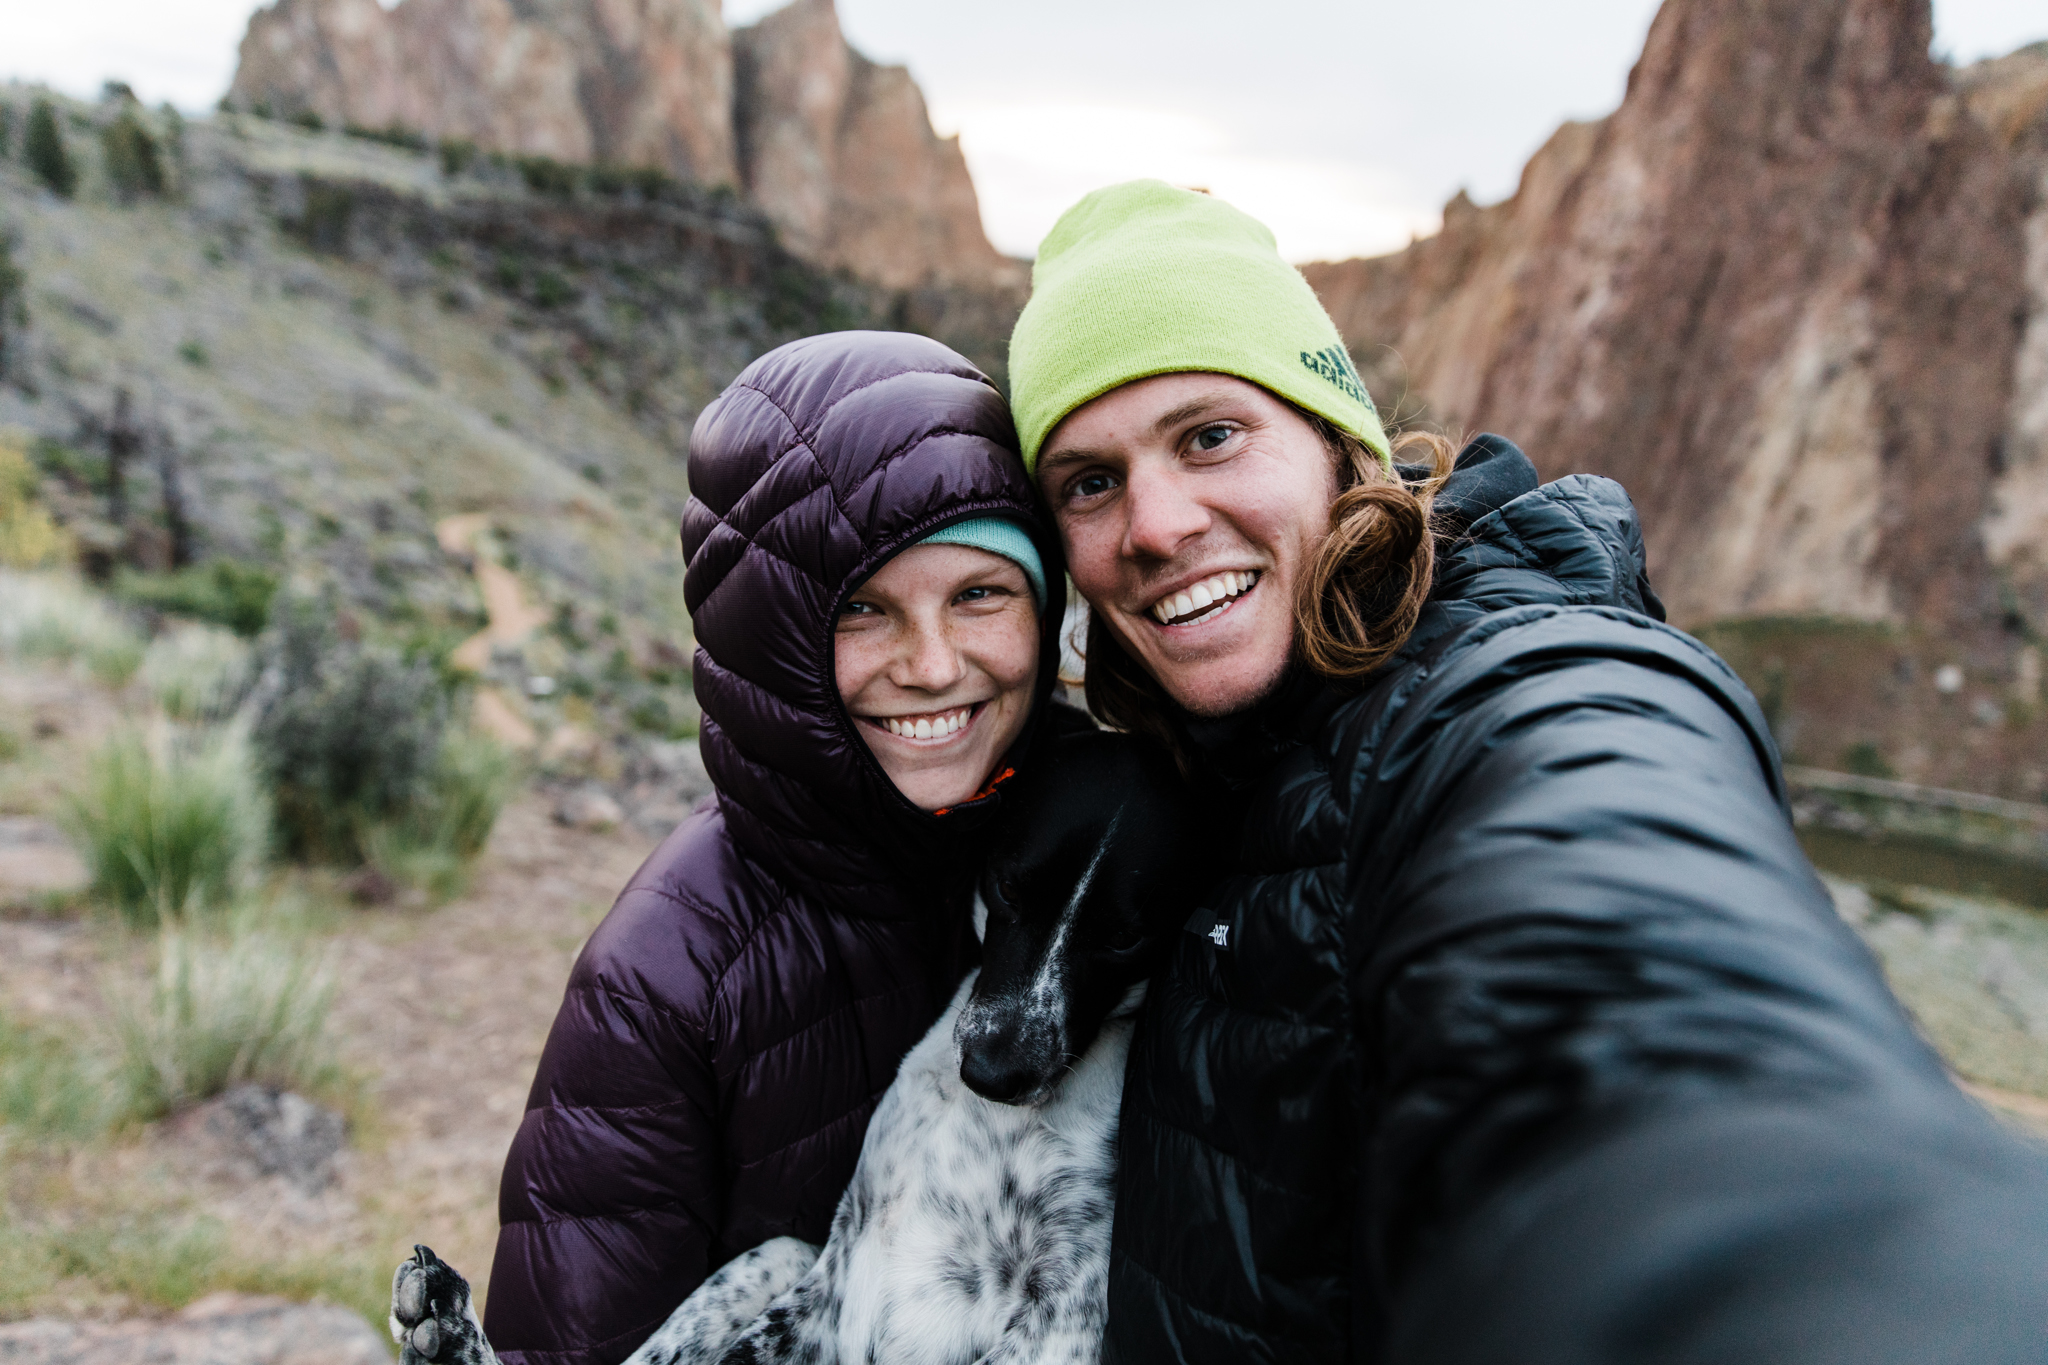 climbing in smith rock | utah and california adventure elopement photographers | the hearnes adventure photography | www.thehearnes.com